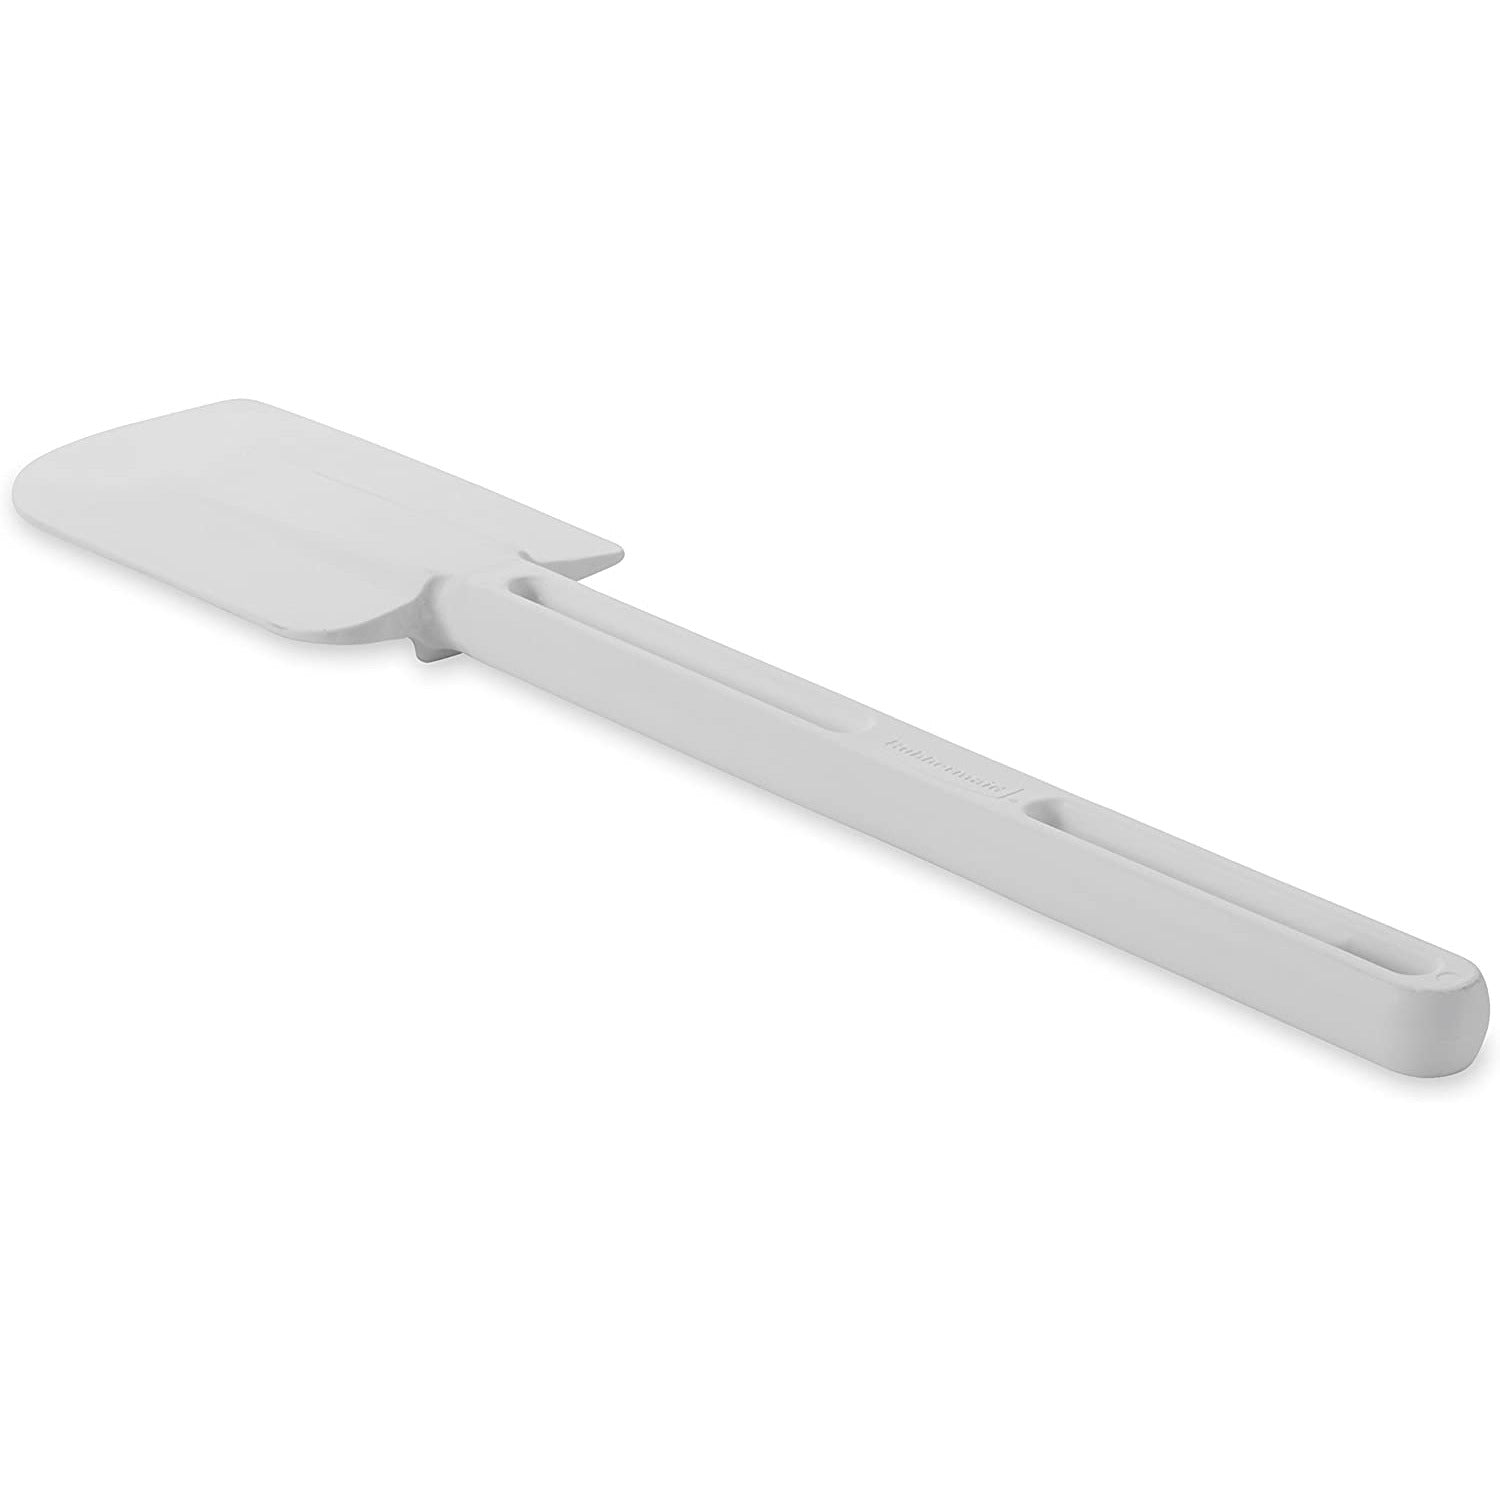 Rubbermaid Commercial Products Scraper Spatula, White, Kitchen Supplies, Restaurant Use